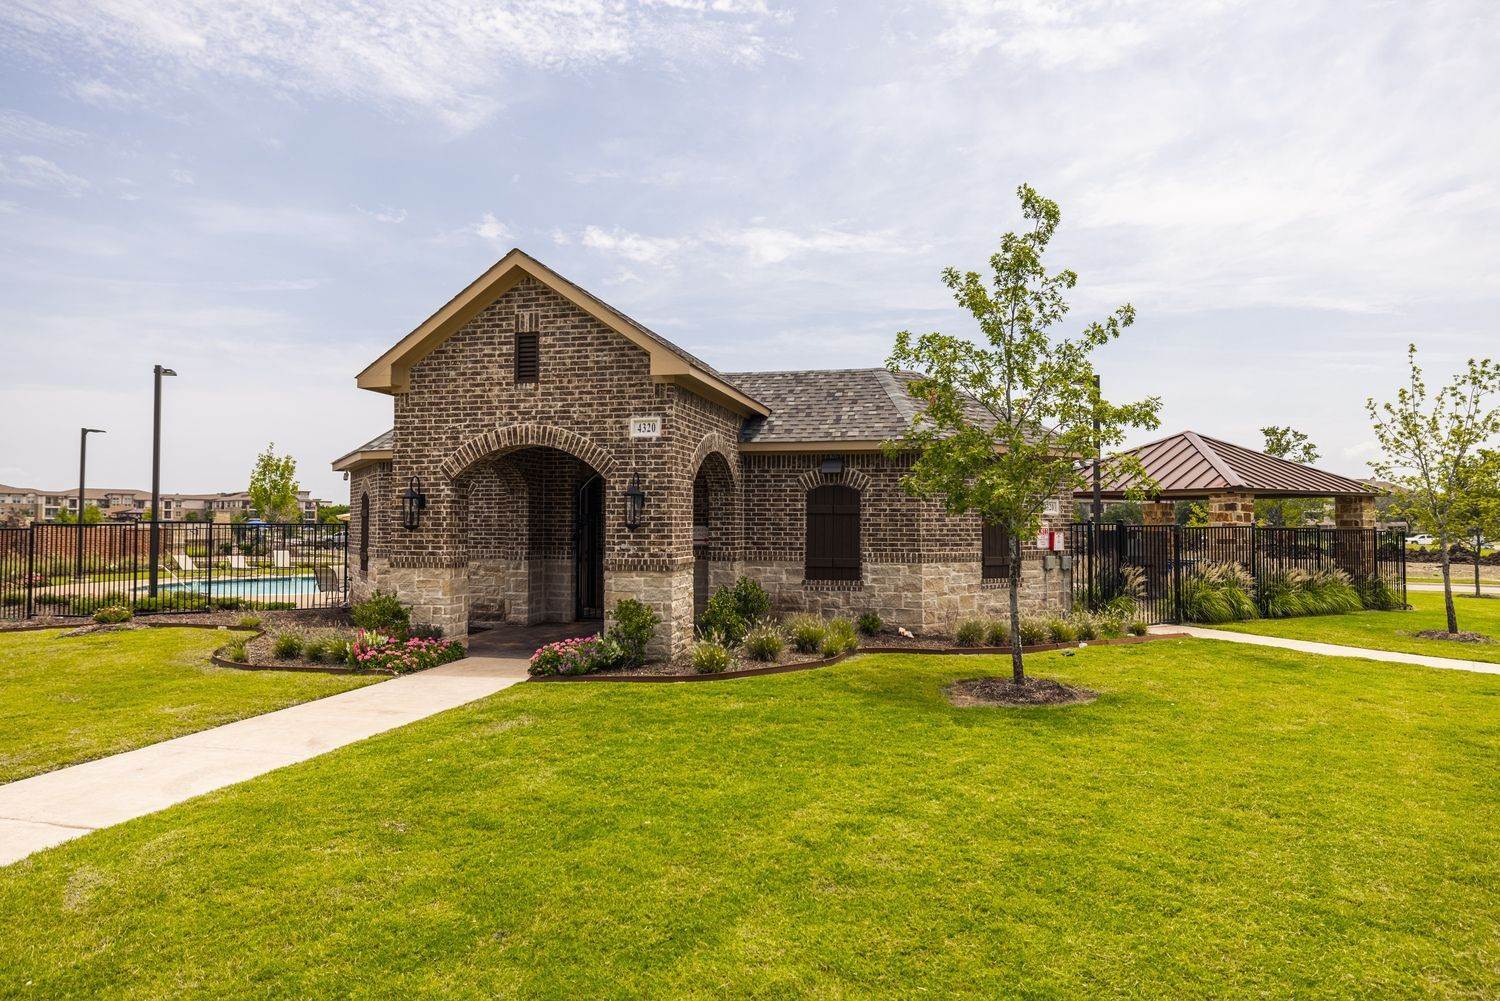 7. Wade Settlement Townhomes κτίριο σε 4269 Willow Pond Drive, Frisco, TX 75034